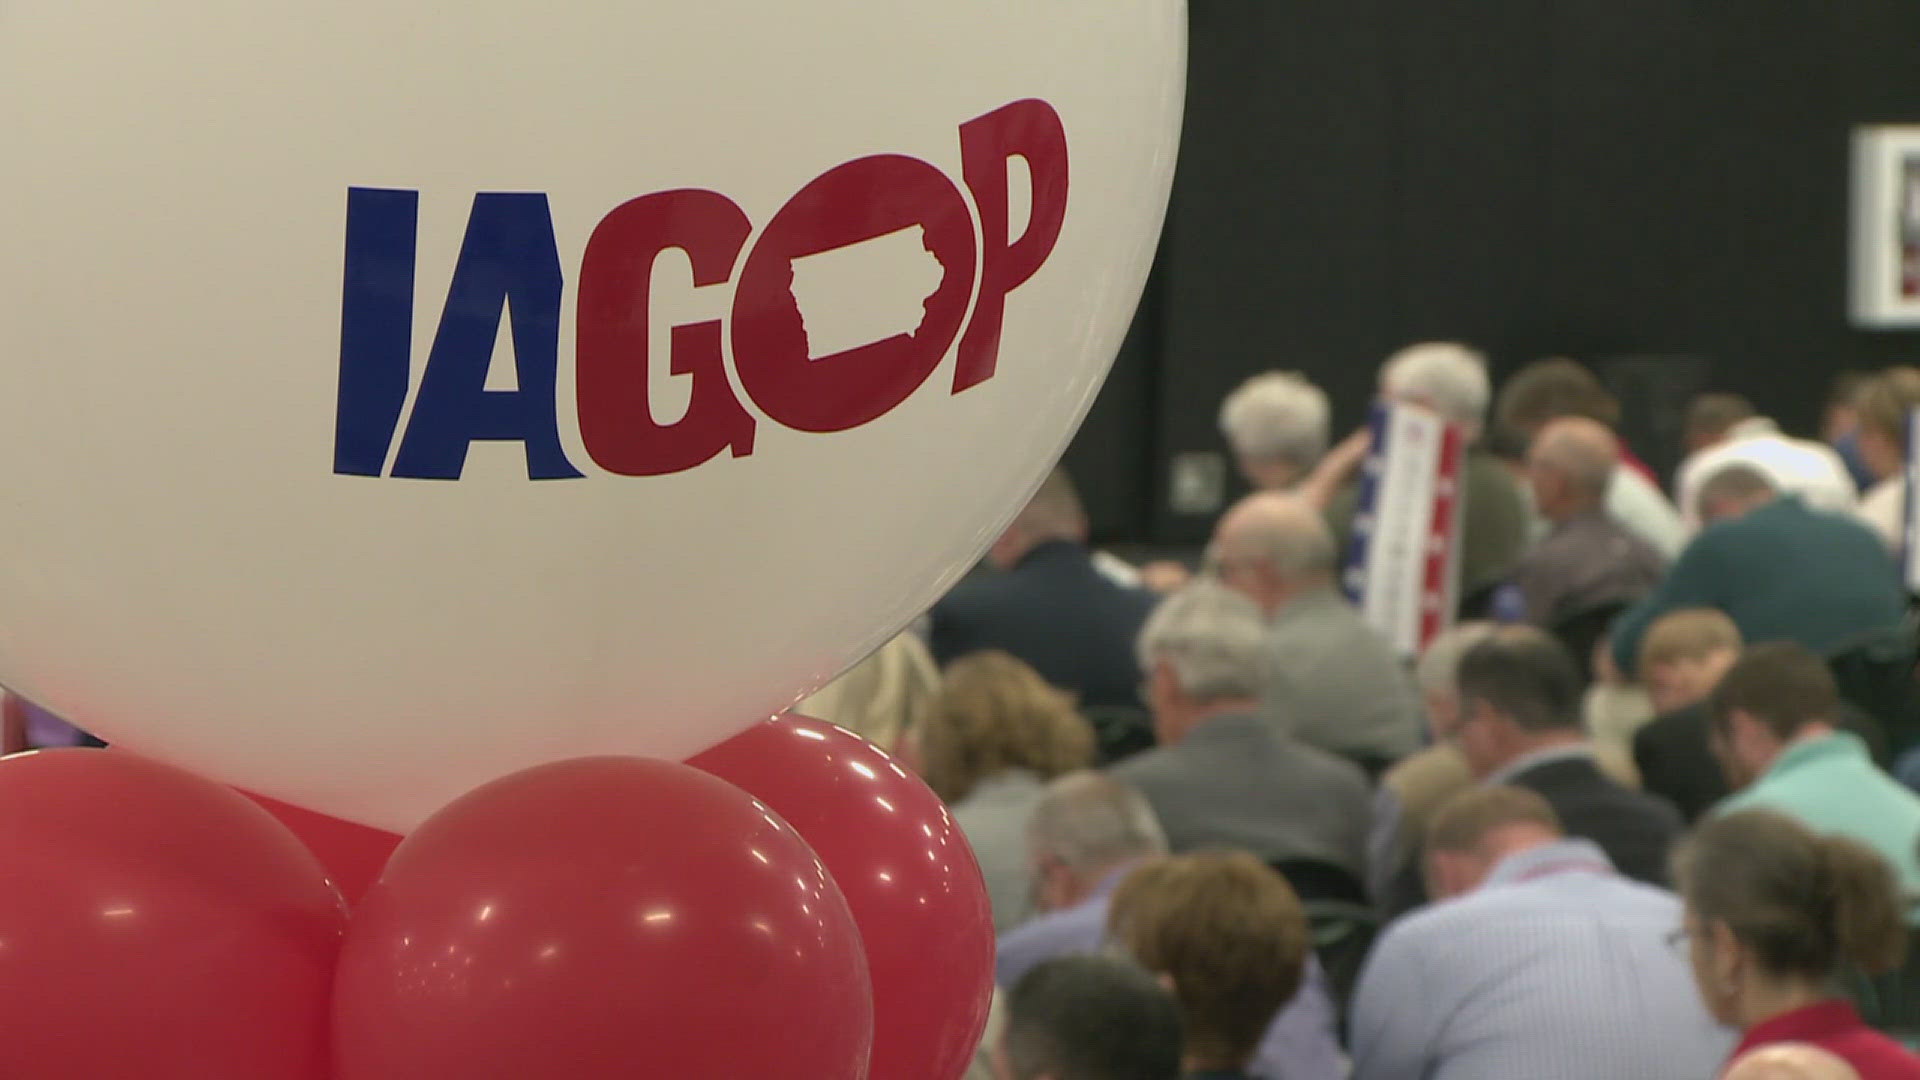 Representatives in attendance include Kim Reynolds and Brenna Bird. Iowa's Democratic representatives will elect their delegates for their convention in mid-August.